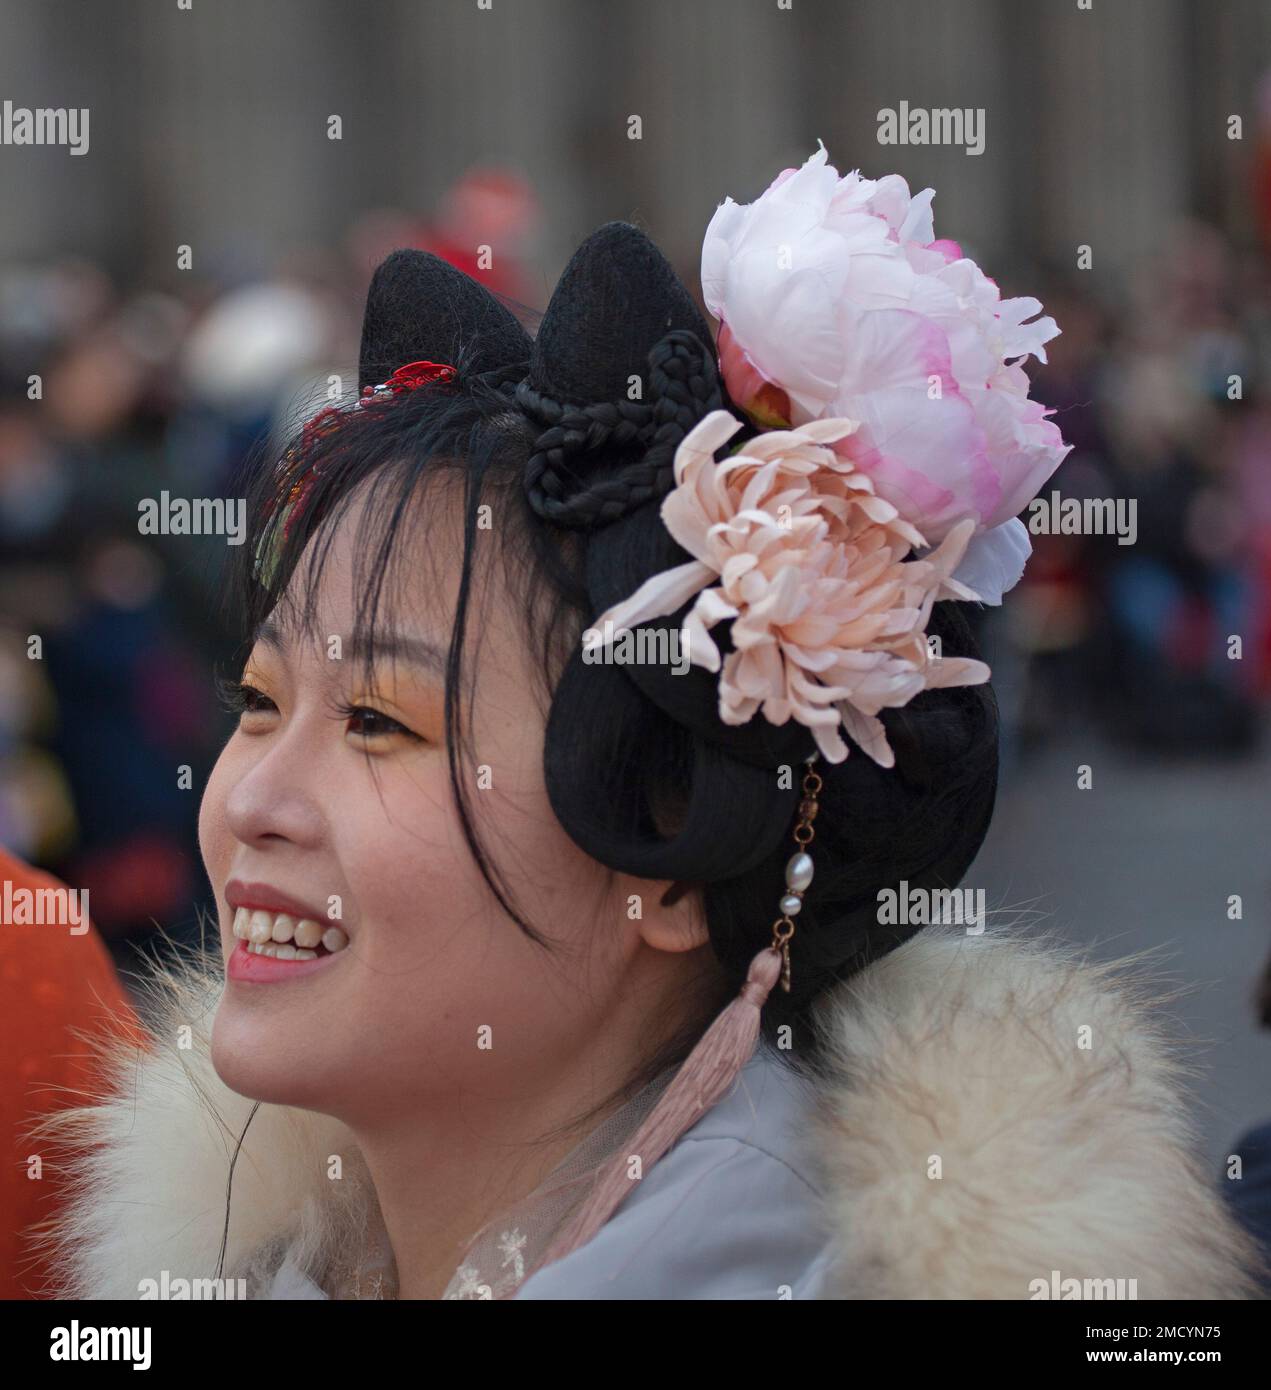 The Mound, Edinburgh, Scotland, UK. 22nd January 2023. Edinburgh city marks the Year of the Rabbit as the Chinese New Year launches today across the world. Credit: Arch White/alamy live news. Stock Photo